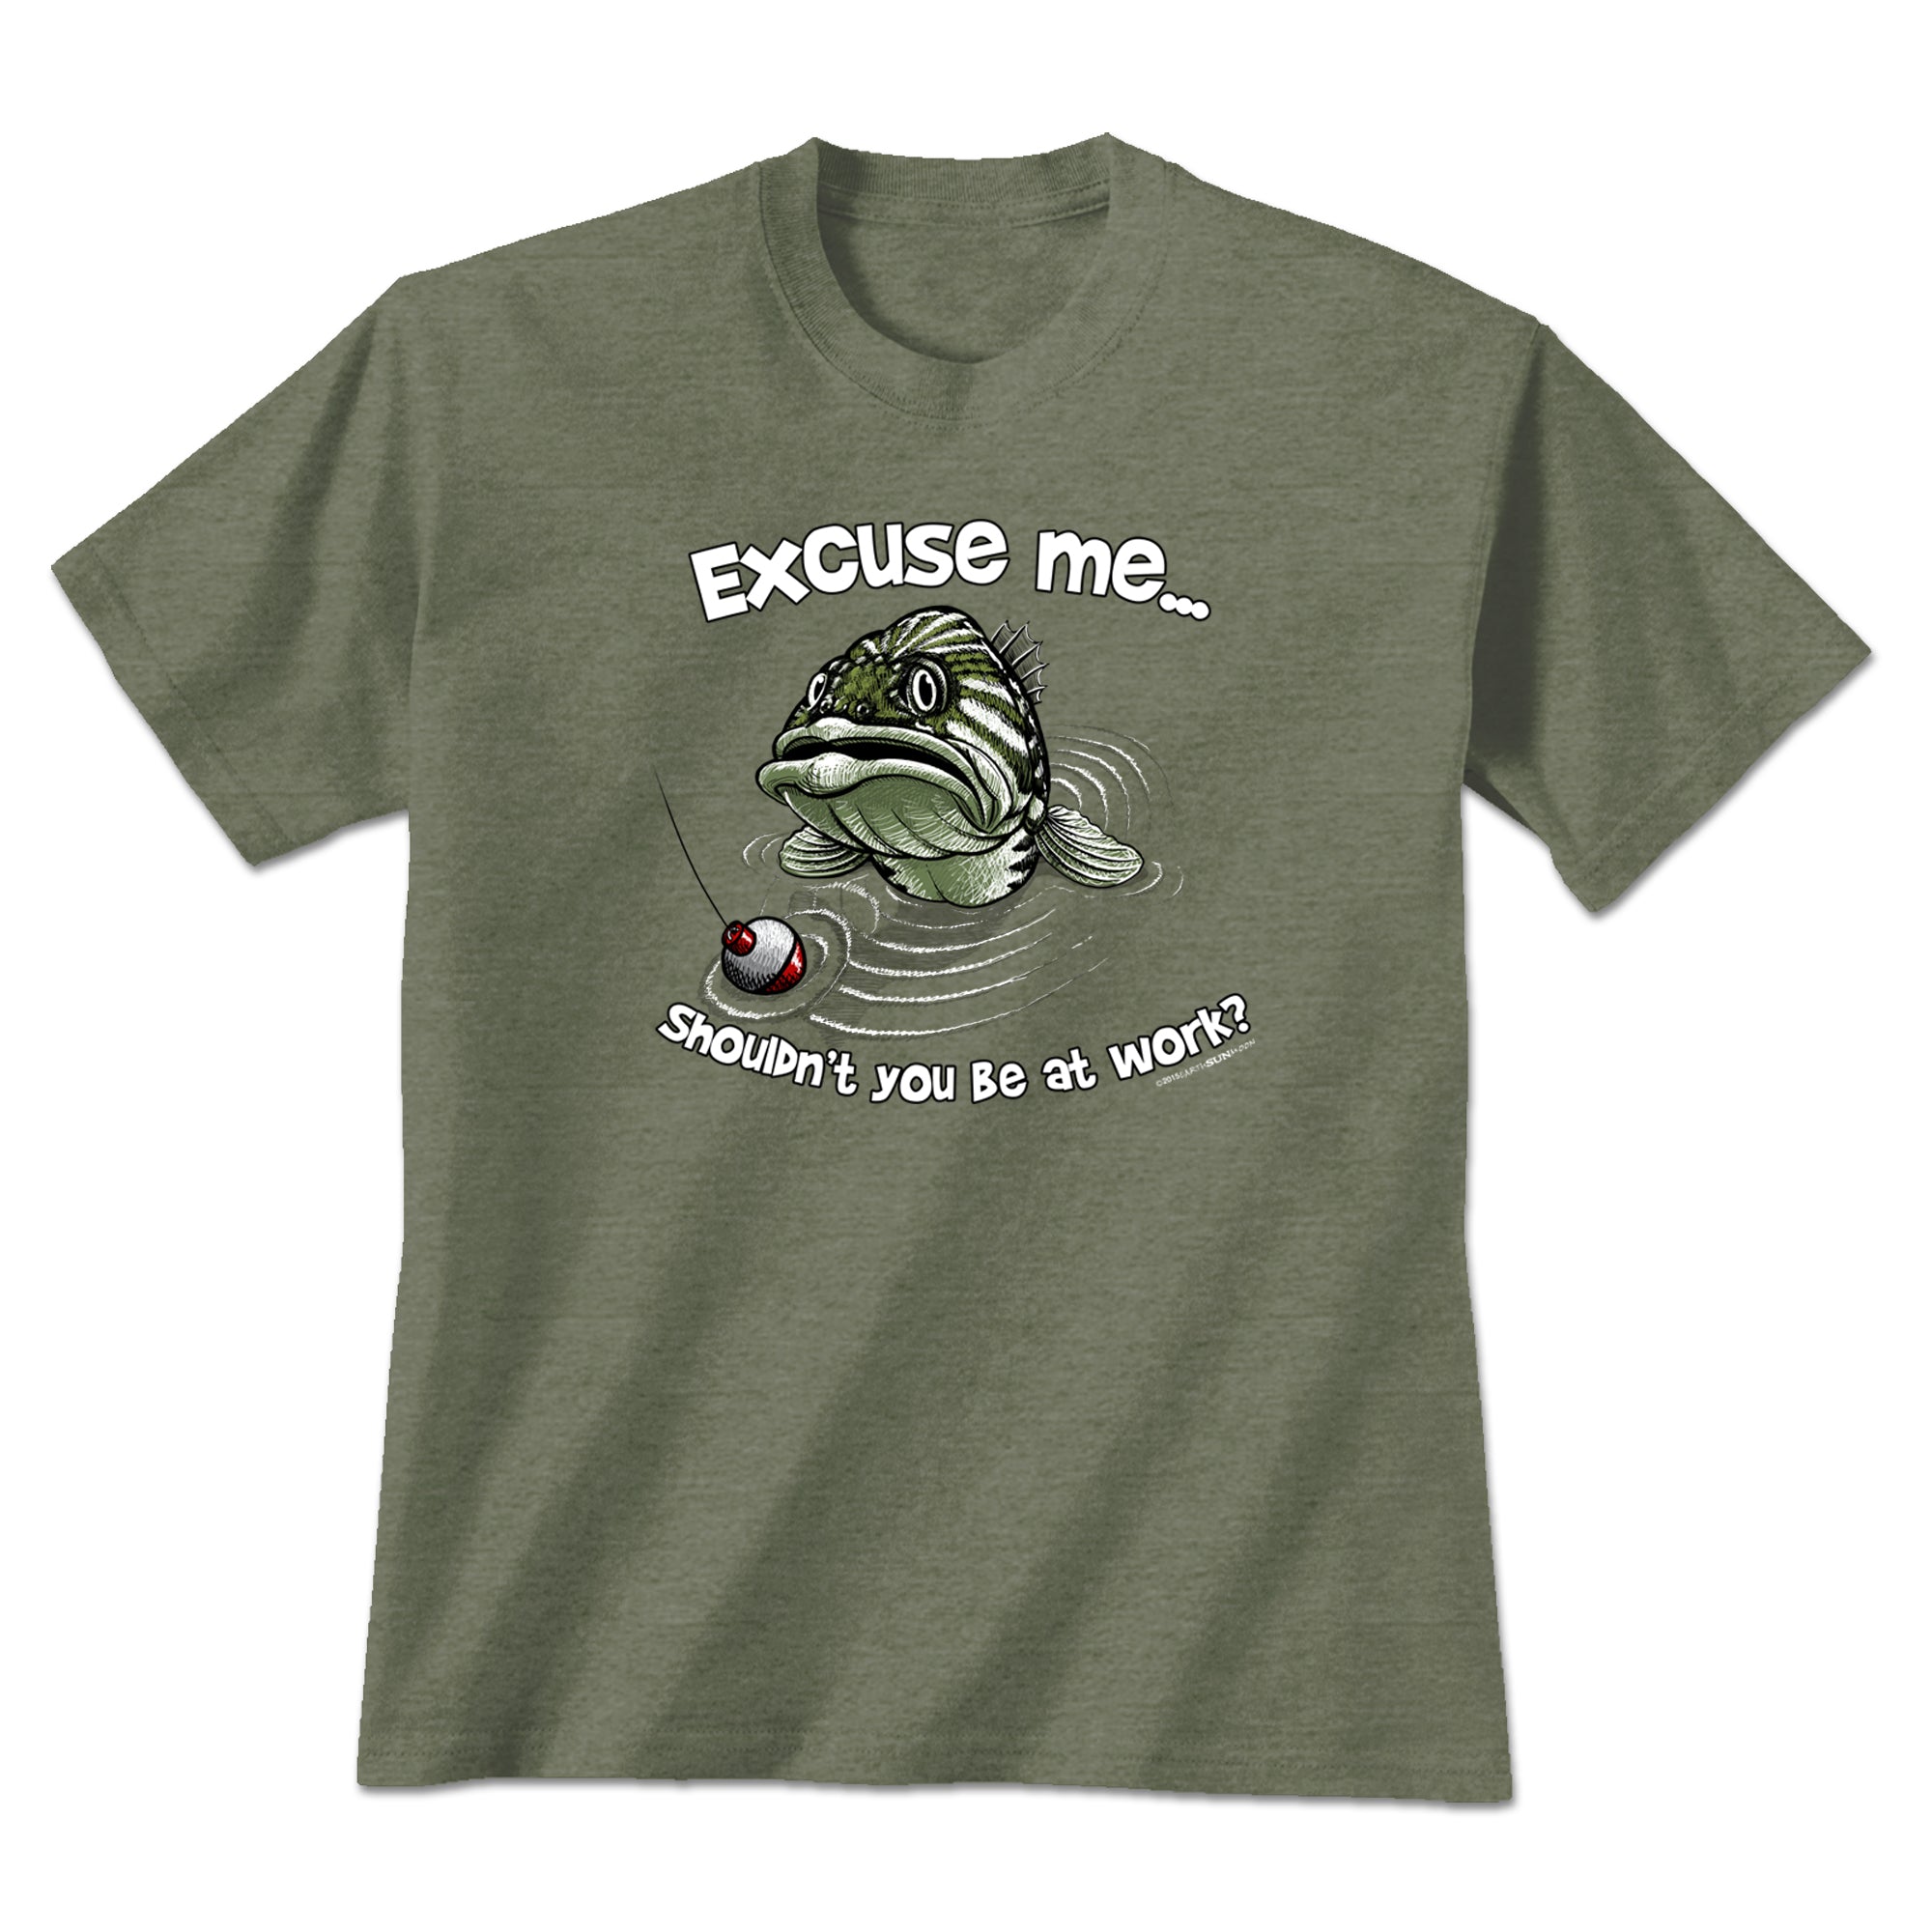 Earth Sun Moon Excuse Me Fish T-Shirt - Heather Military Green - S